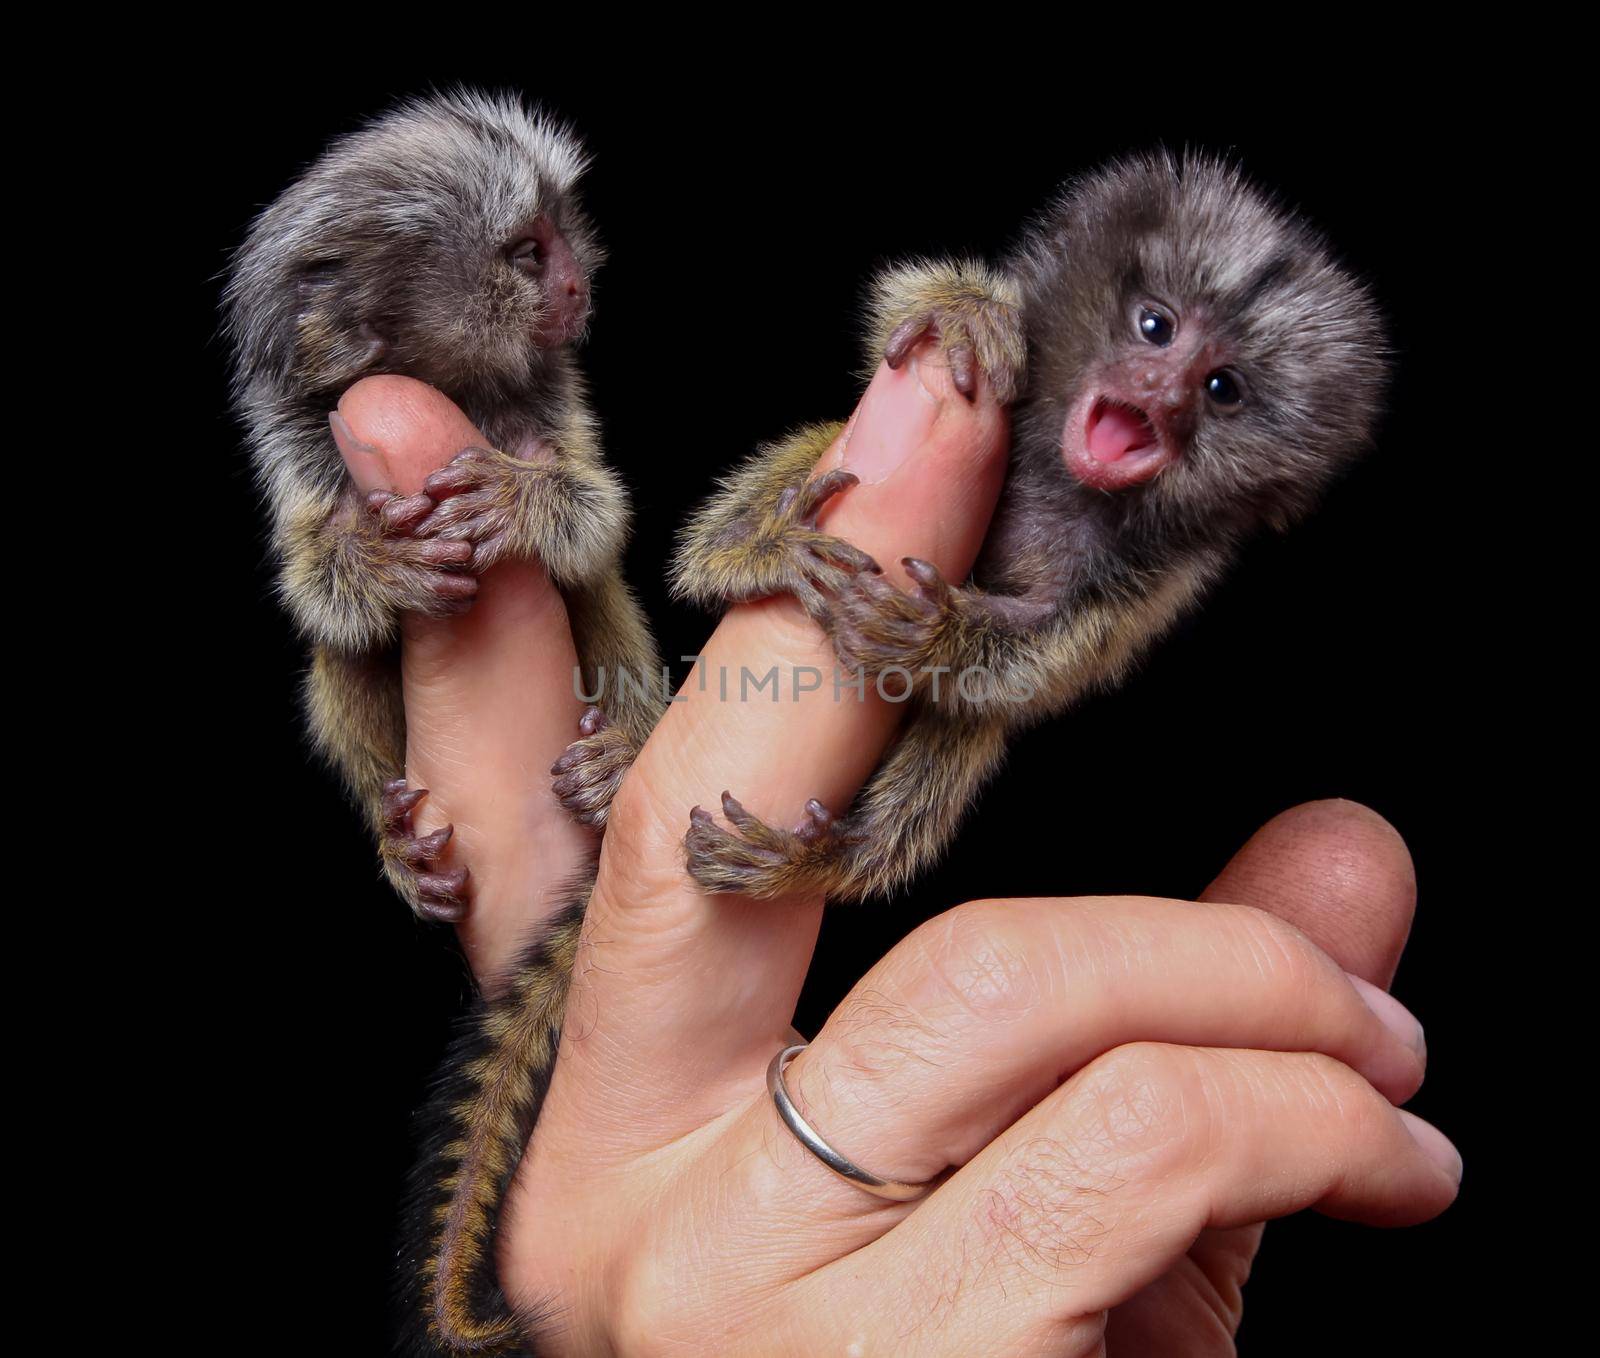 The common marmoset's babies on fingers isolated on black by RosaJay